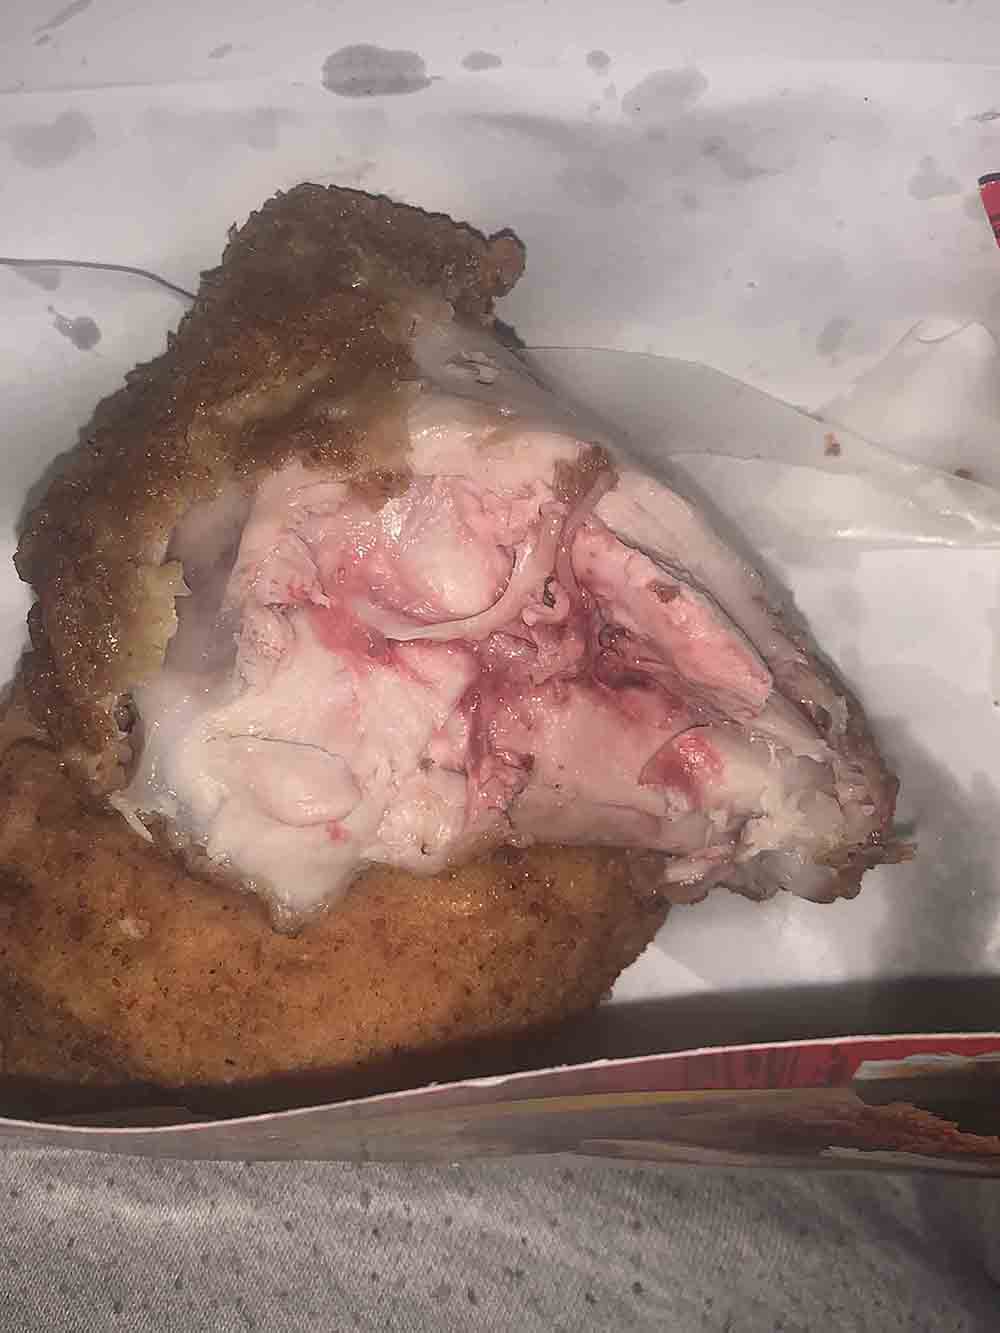 Just Eat investigate after customer eats raw chicken from takeaway - Consumer News